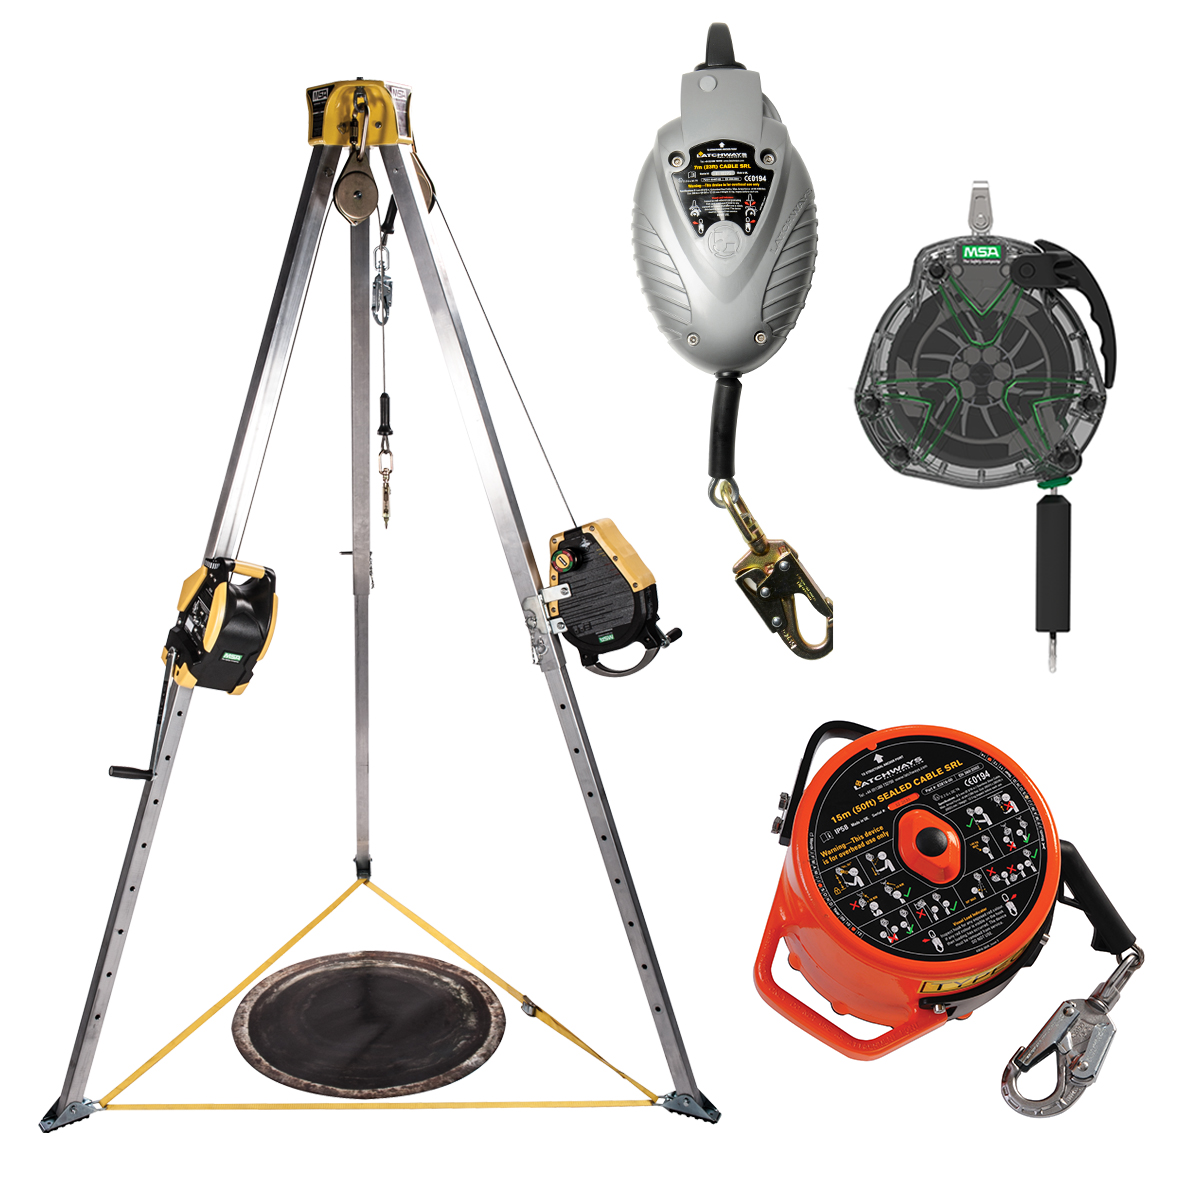 Group of MSA fall protection products